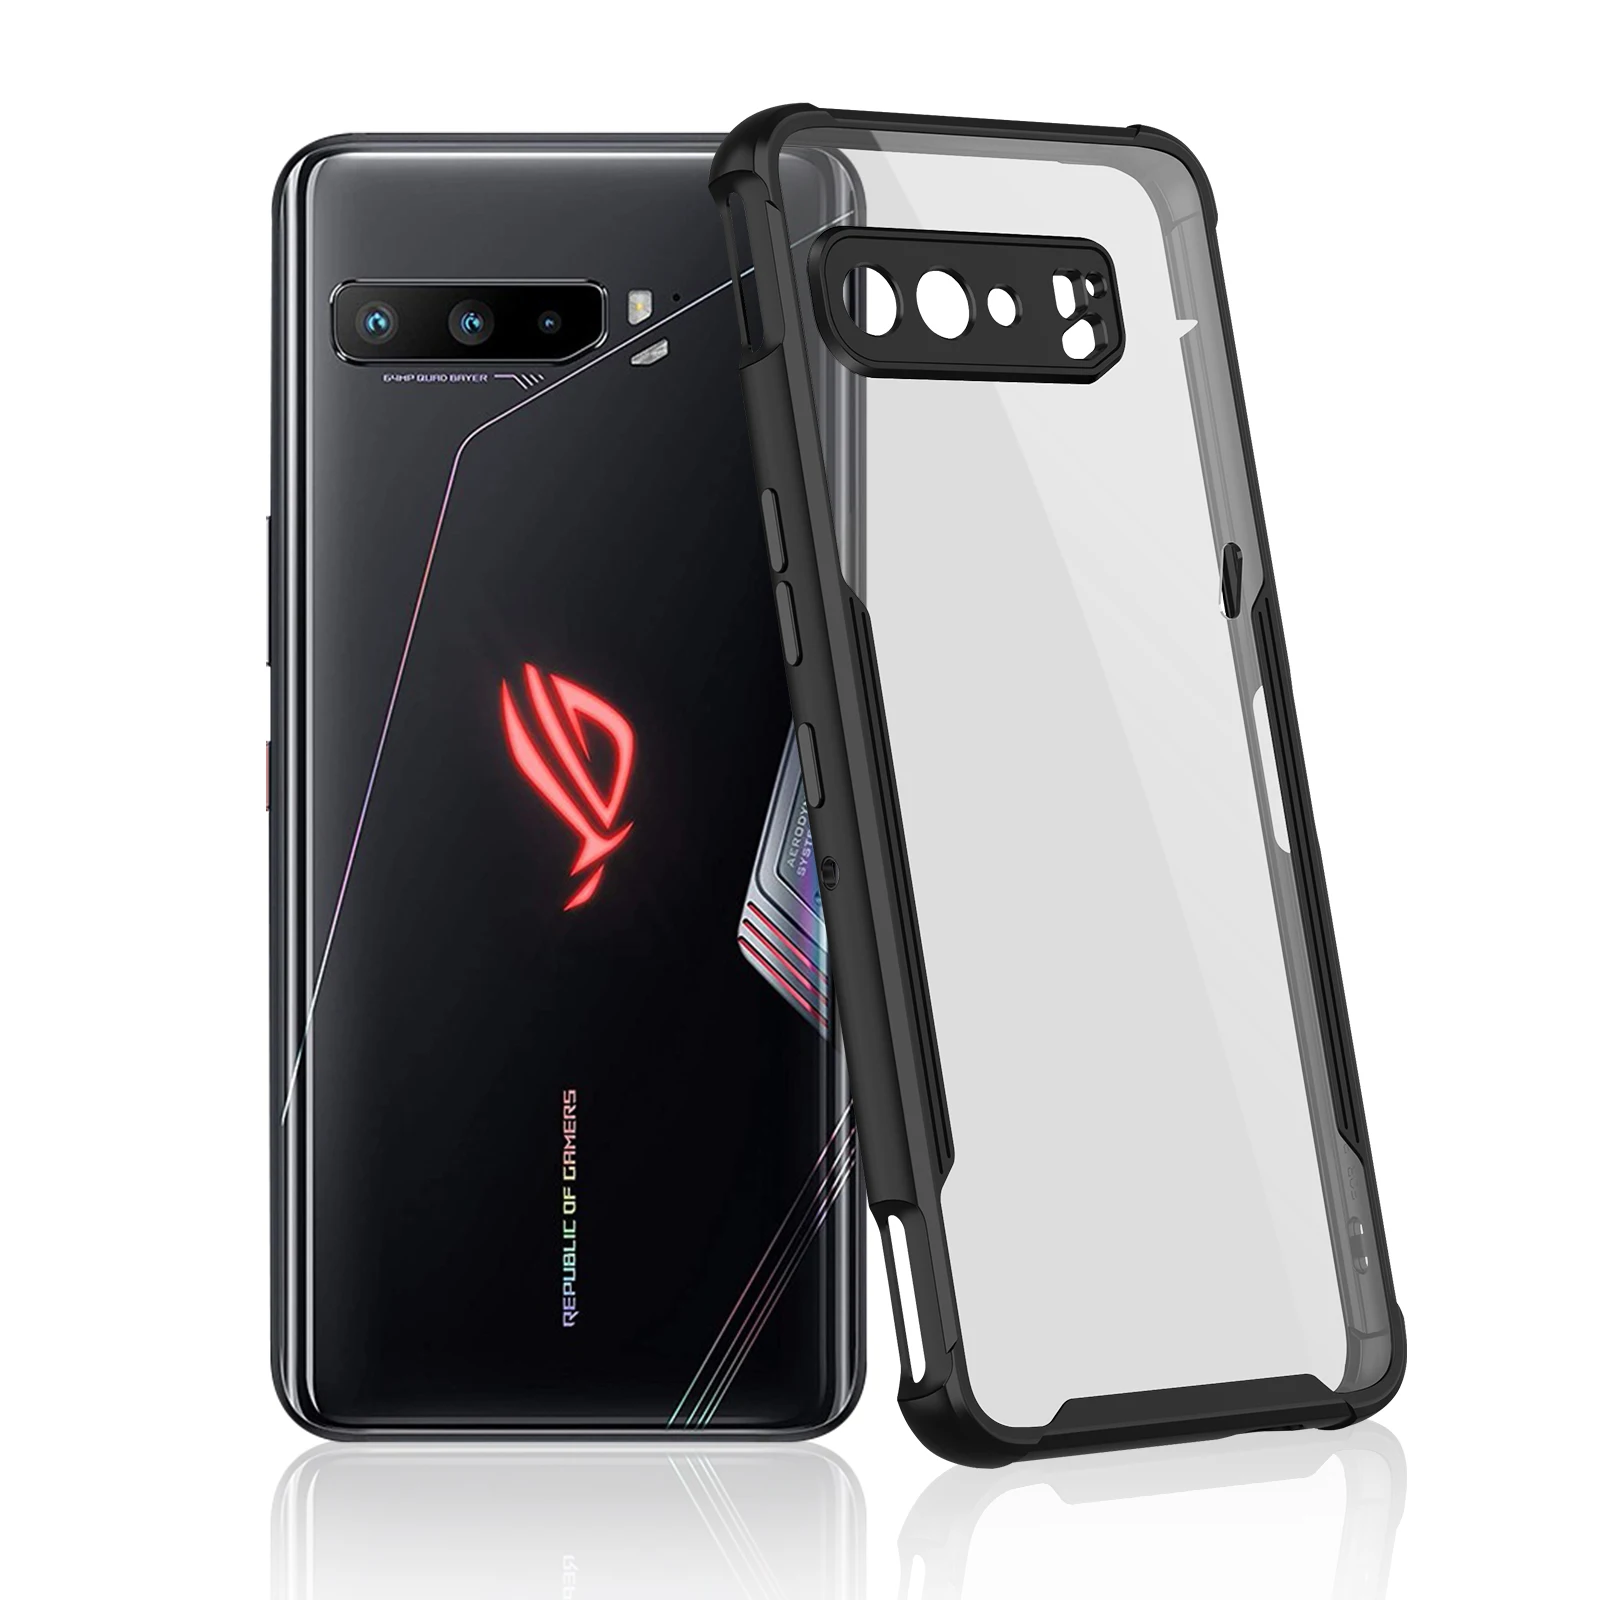 ZSHOW Case  for ASUS ROG Phone 3 Armour Case TPU Frame with Clear PC Back Air Trigger Compatible Amazing Drop Protection